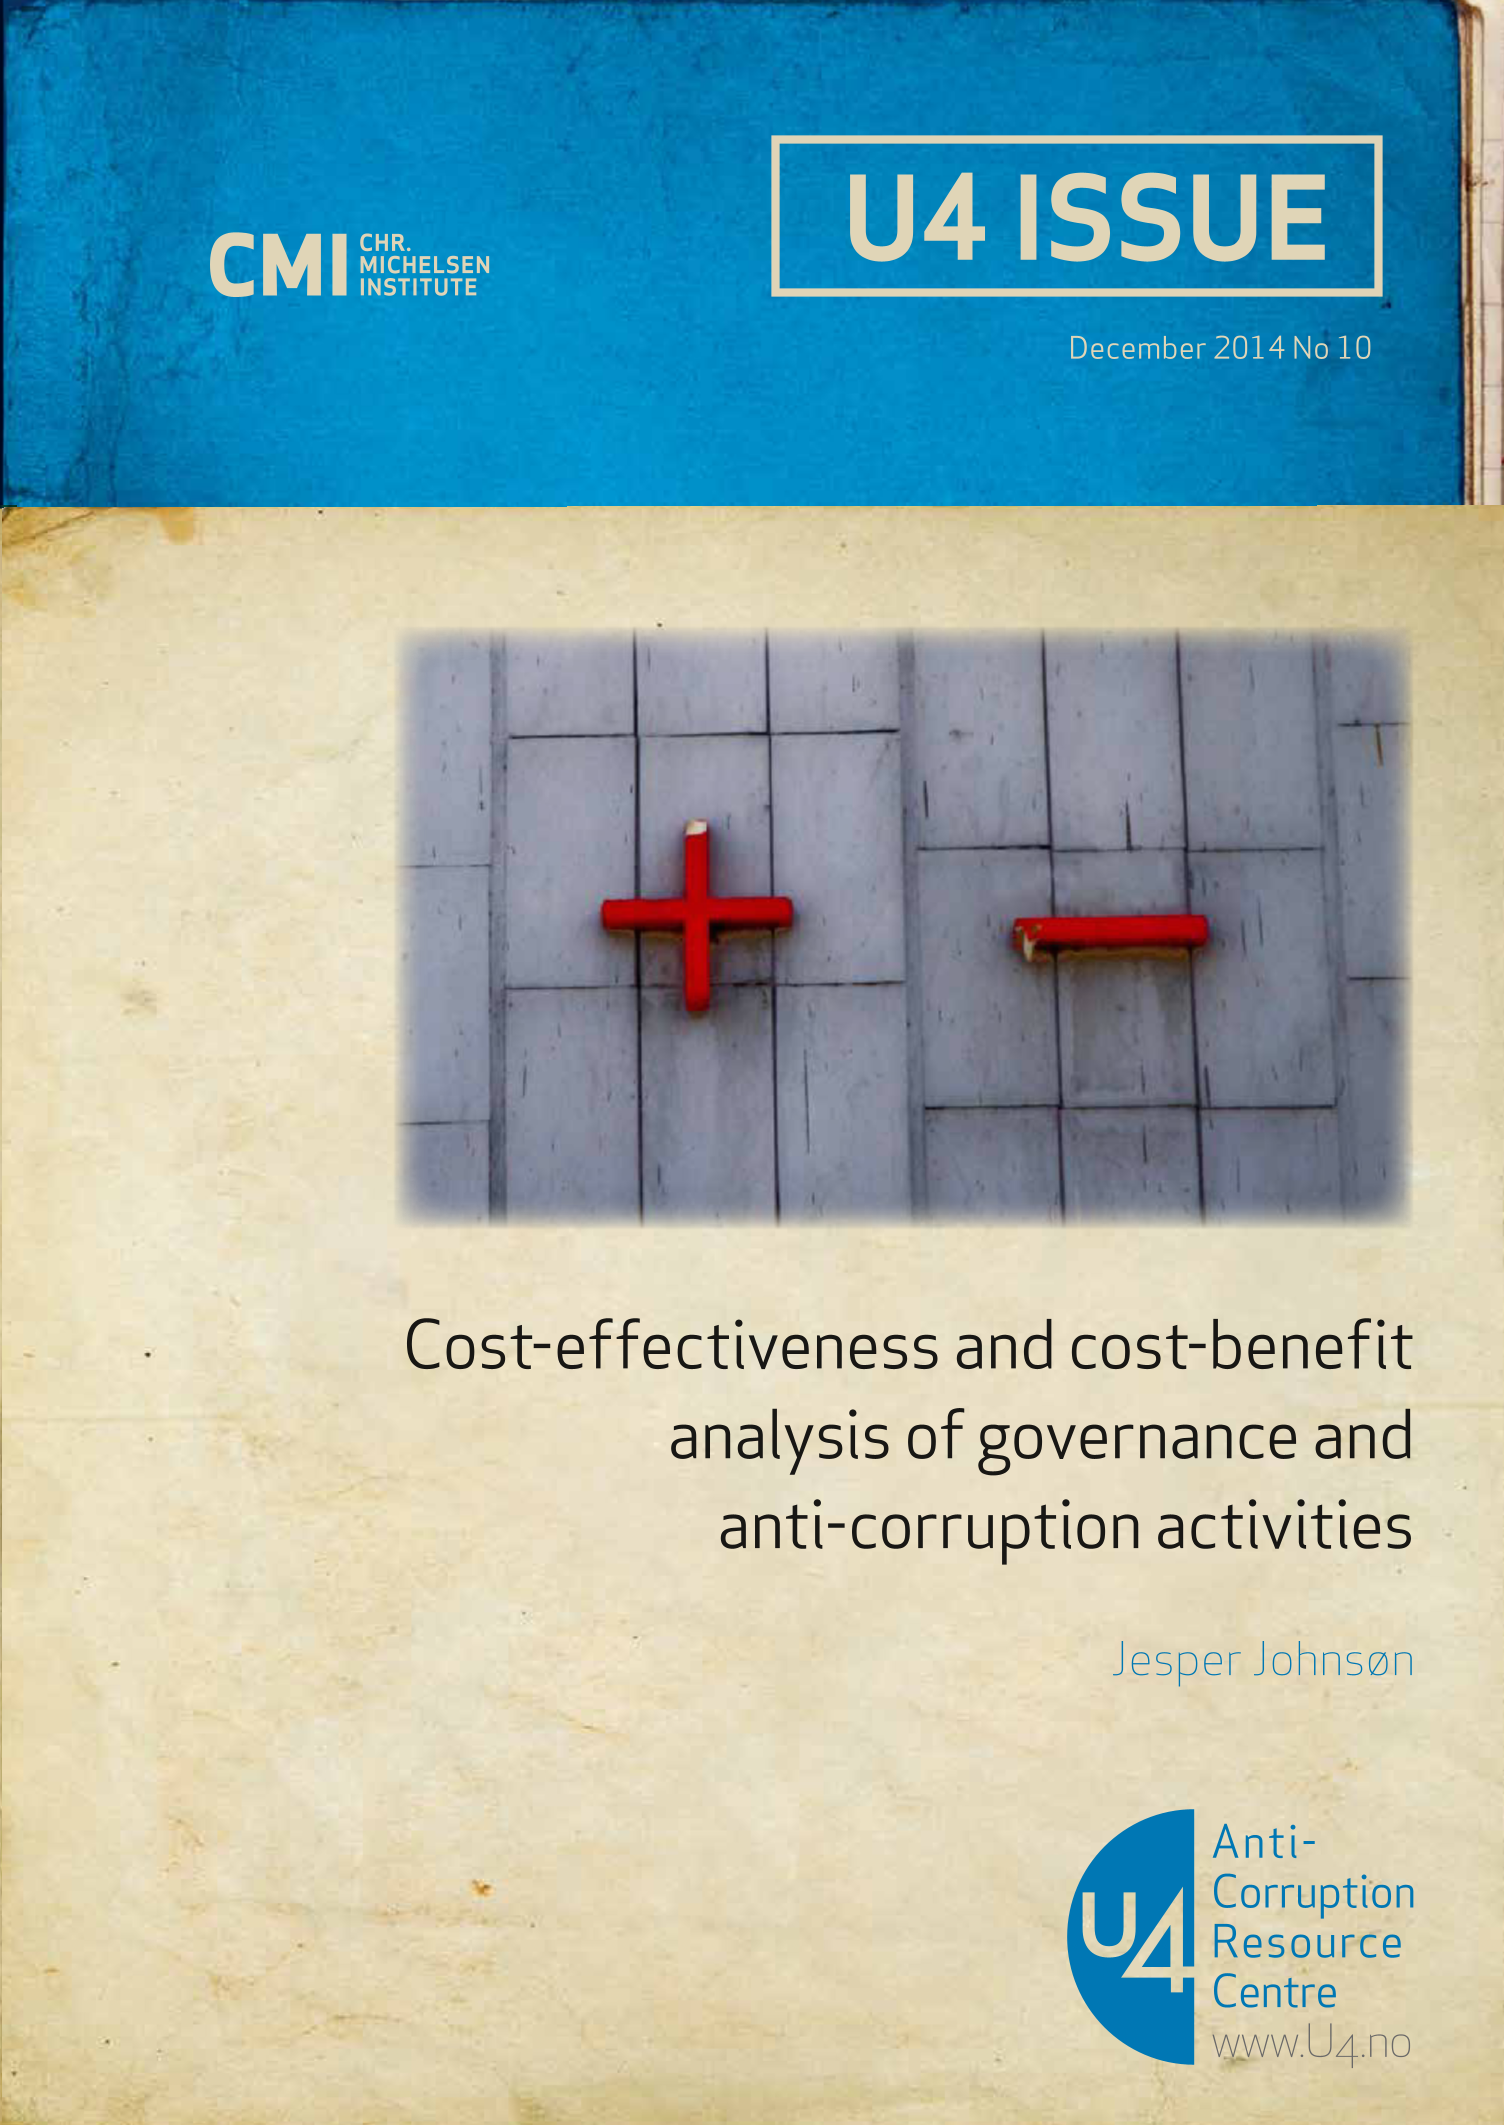 Cost-effectiveness and cost-benefit analysis of governance and anti-corruption activities